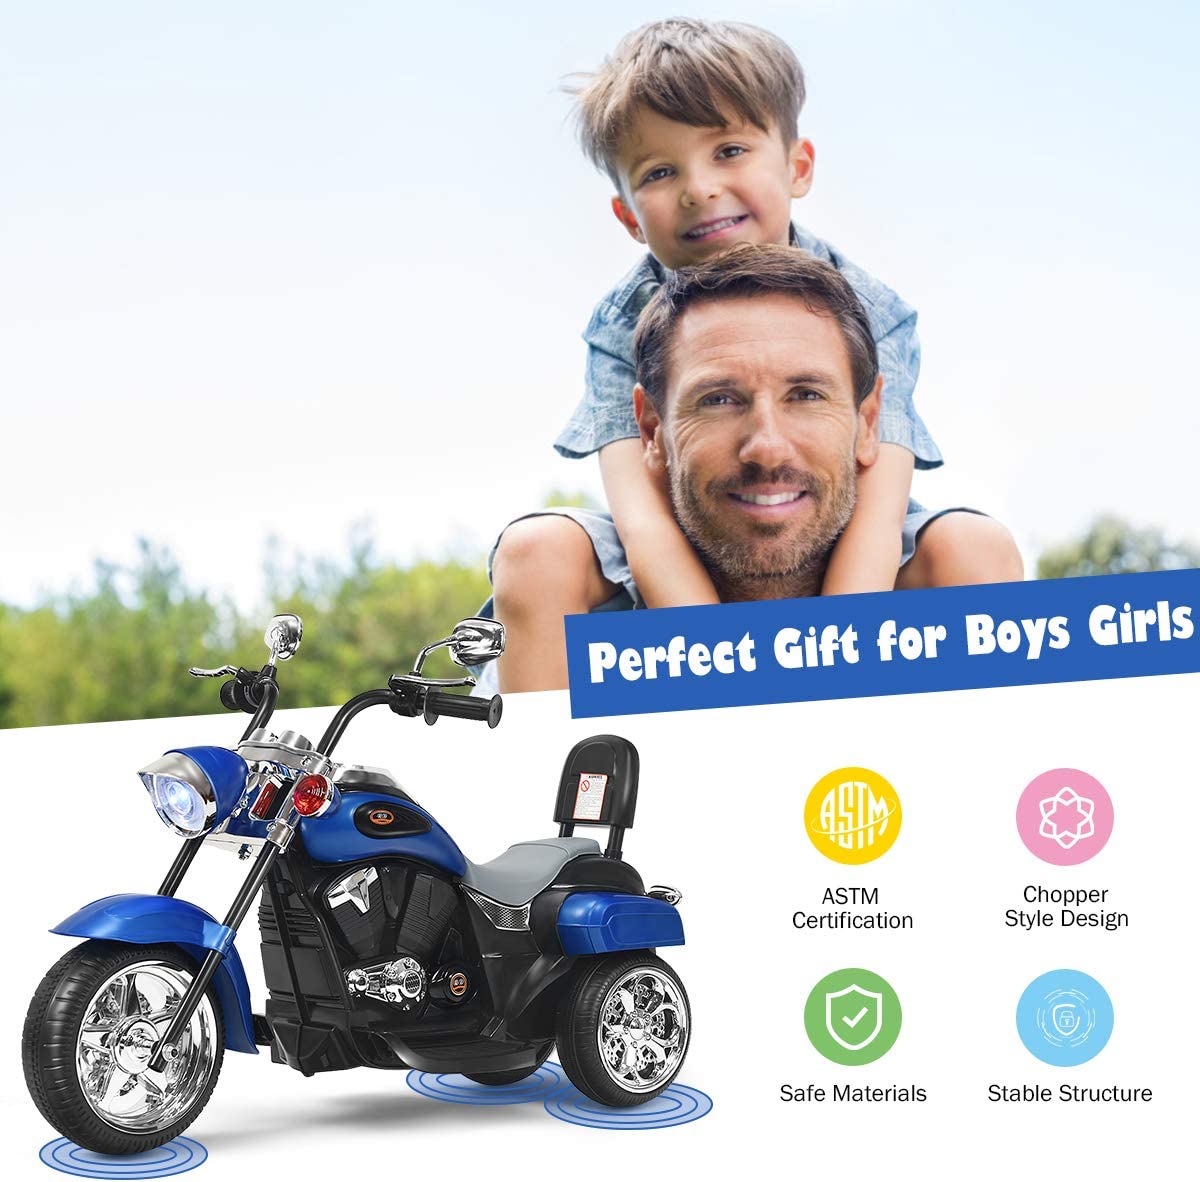 Chairliving 6V Kids Ride On Chopper Motorcycle 3 Wheel Battery Powered Trike with Headlight for Boys Girls Gift 